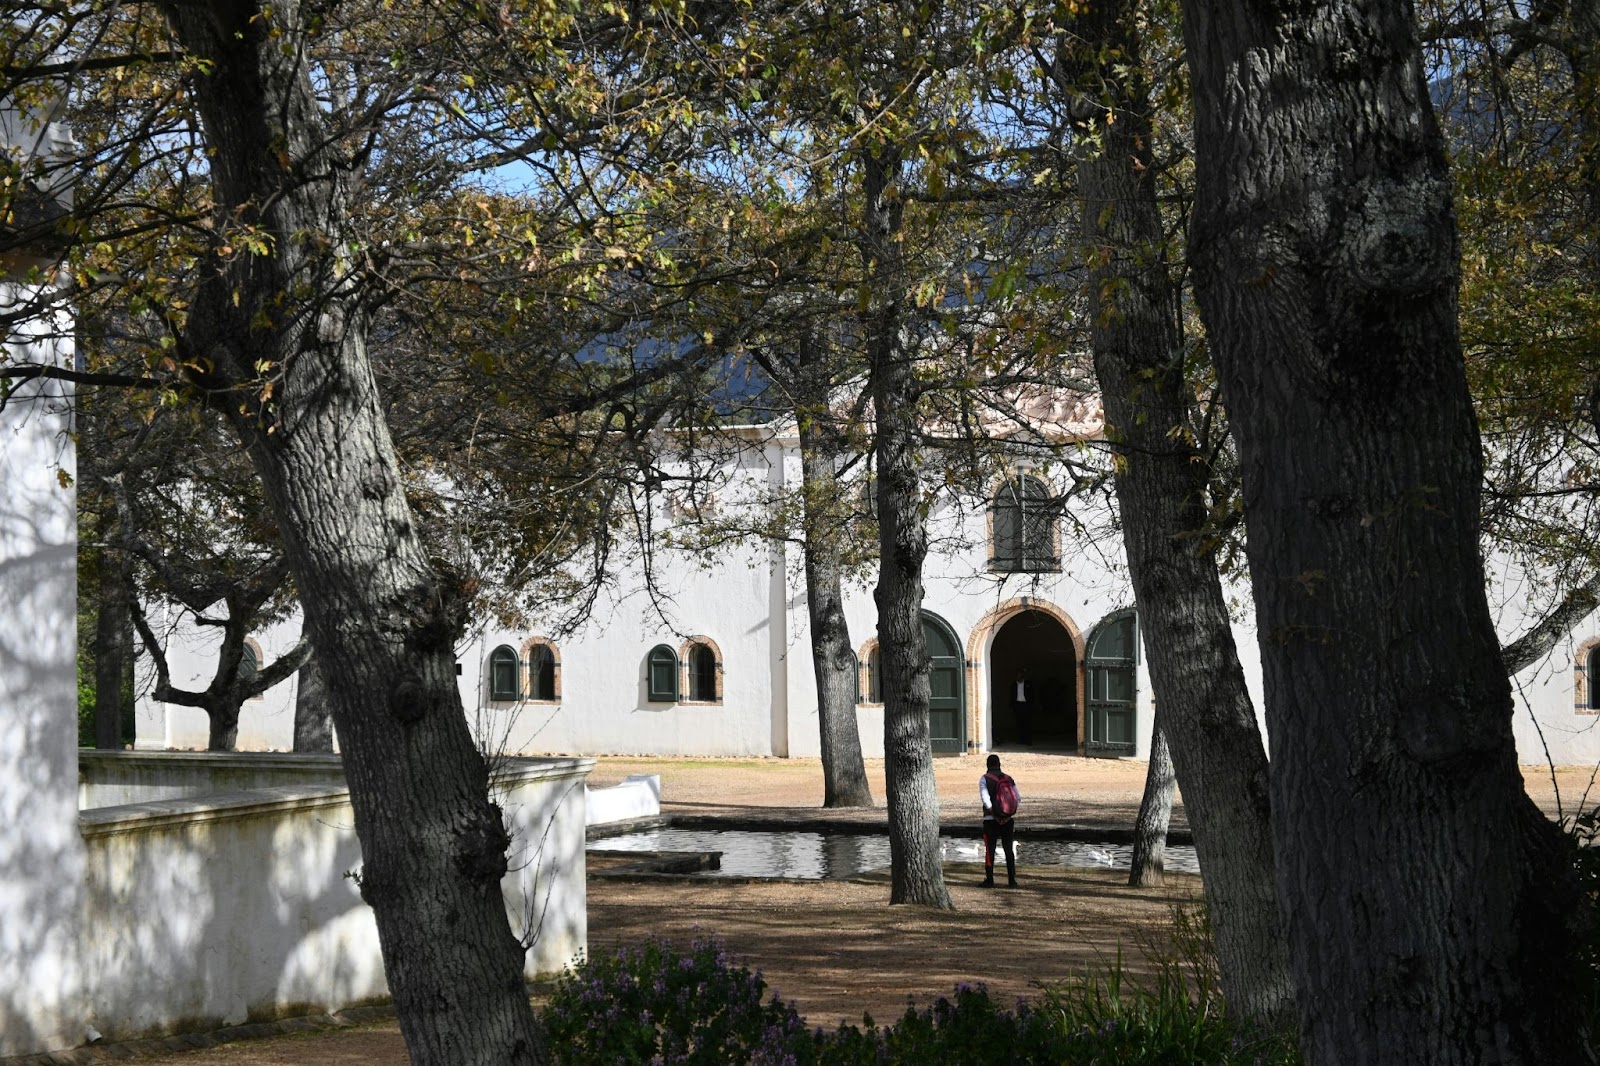 A view of the iconic Groot Constantia building